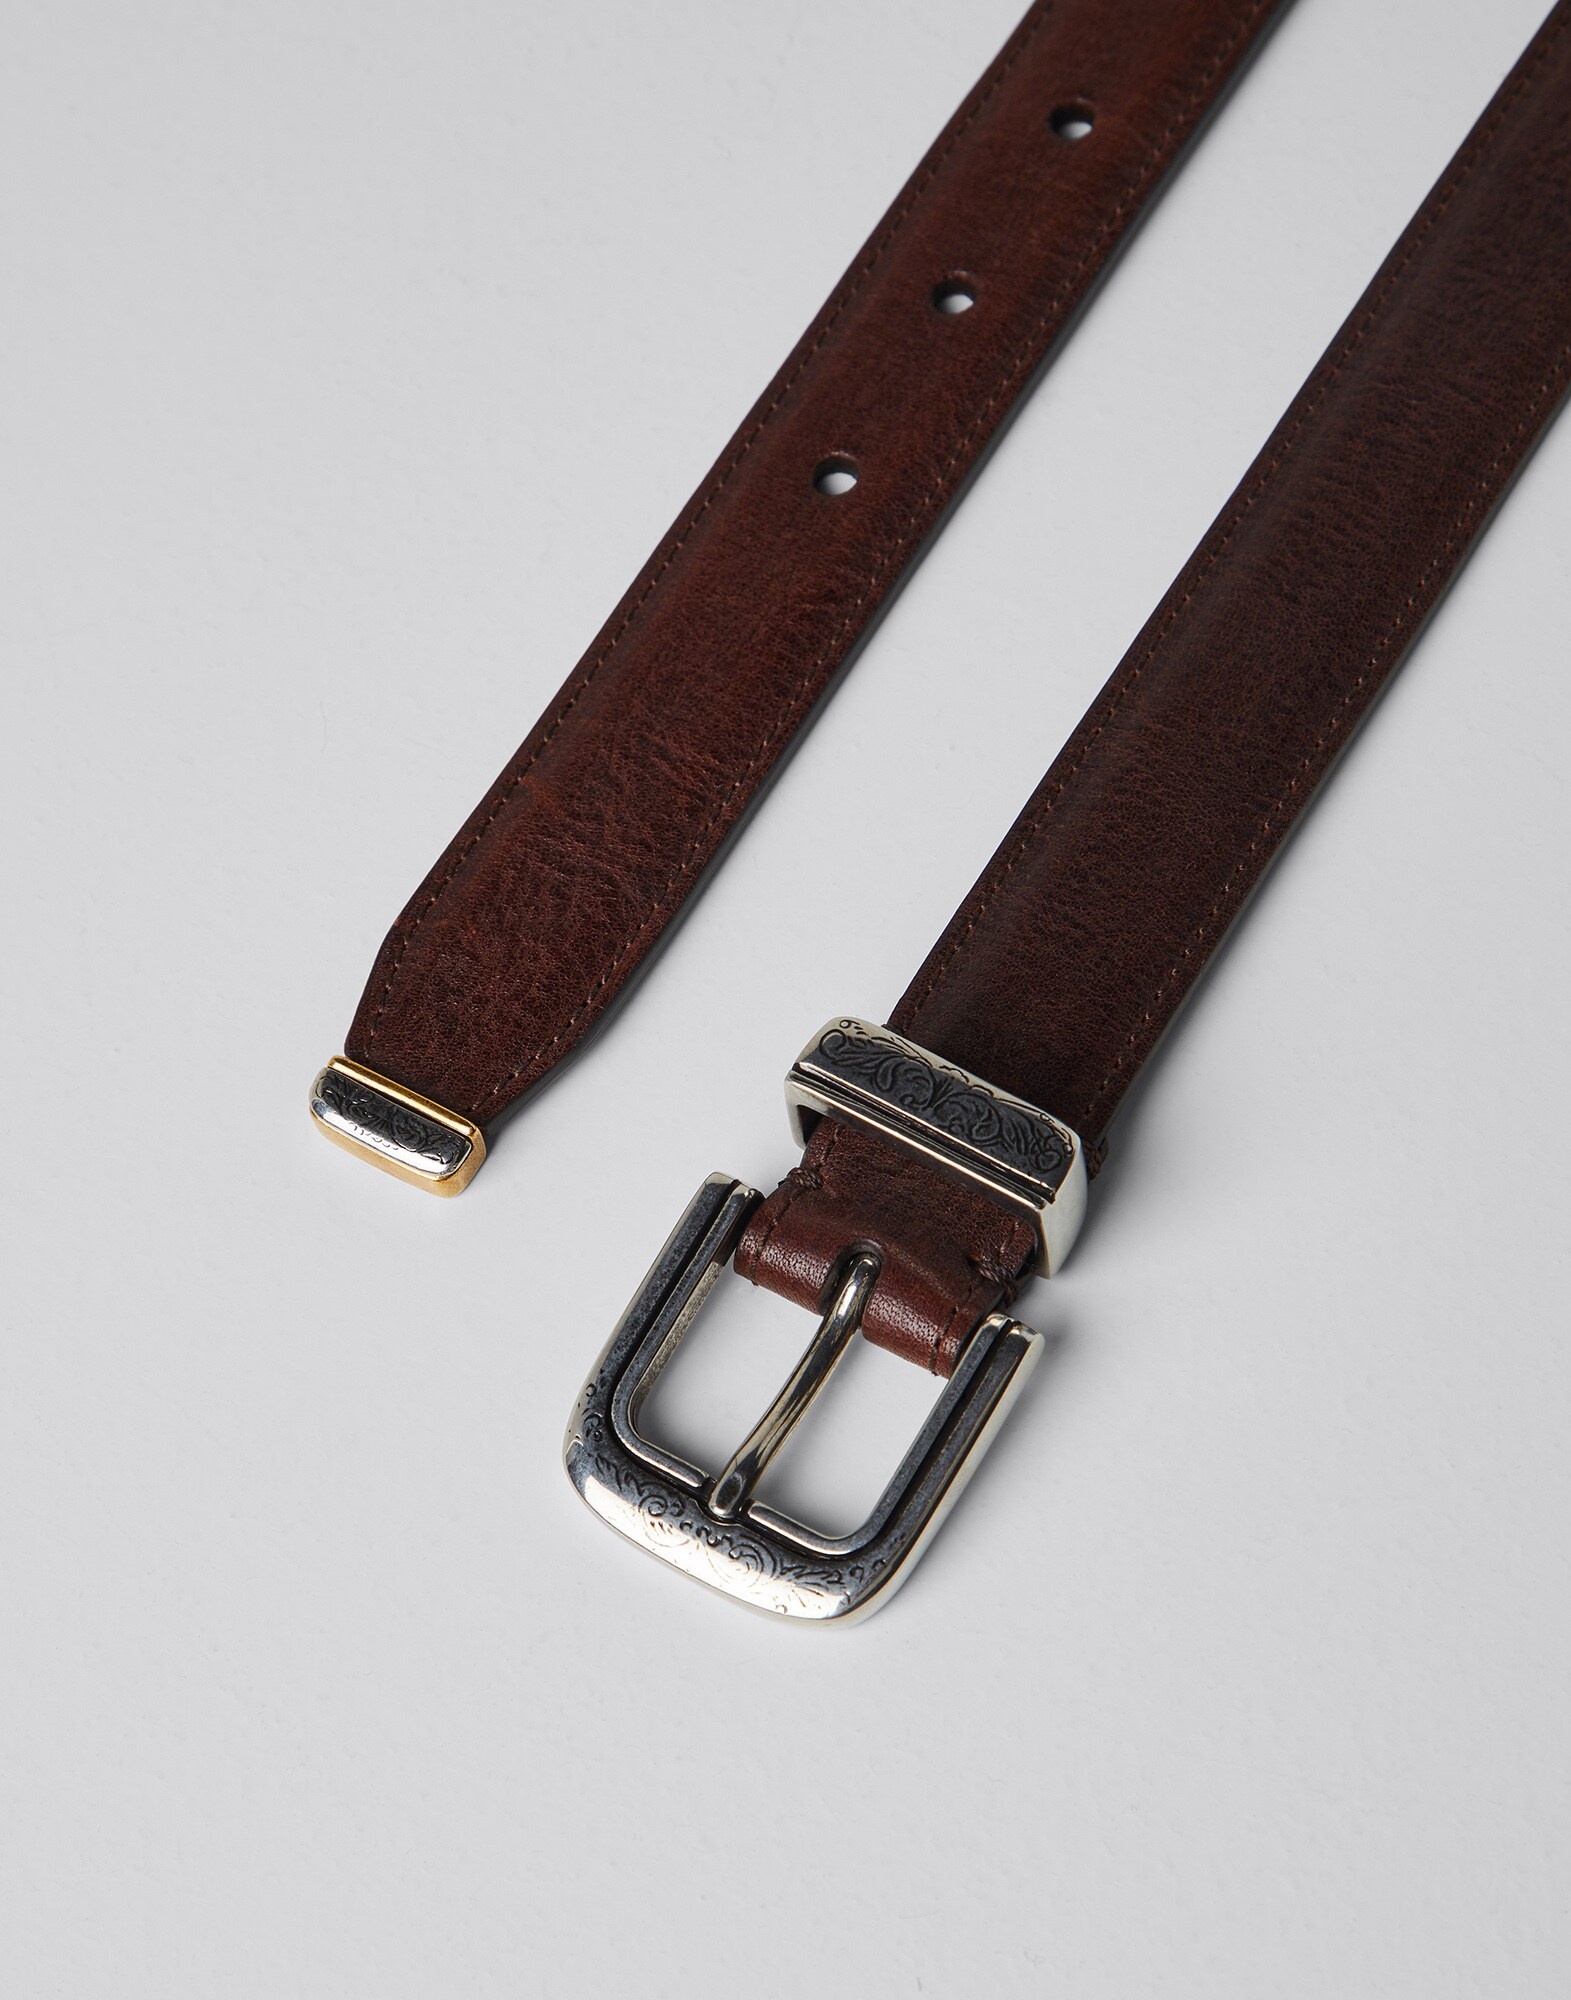 Blotted calfskin belt with detailed buckle and tip - 2